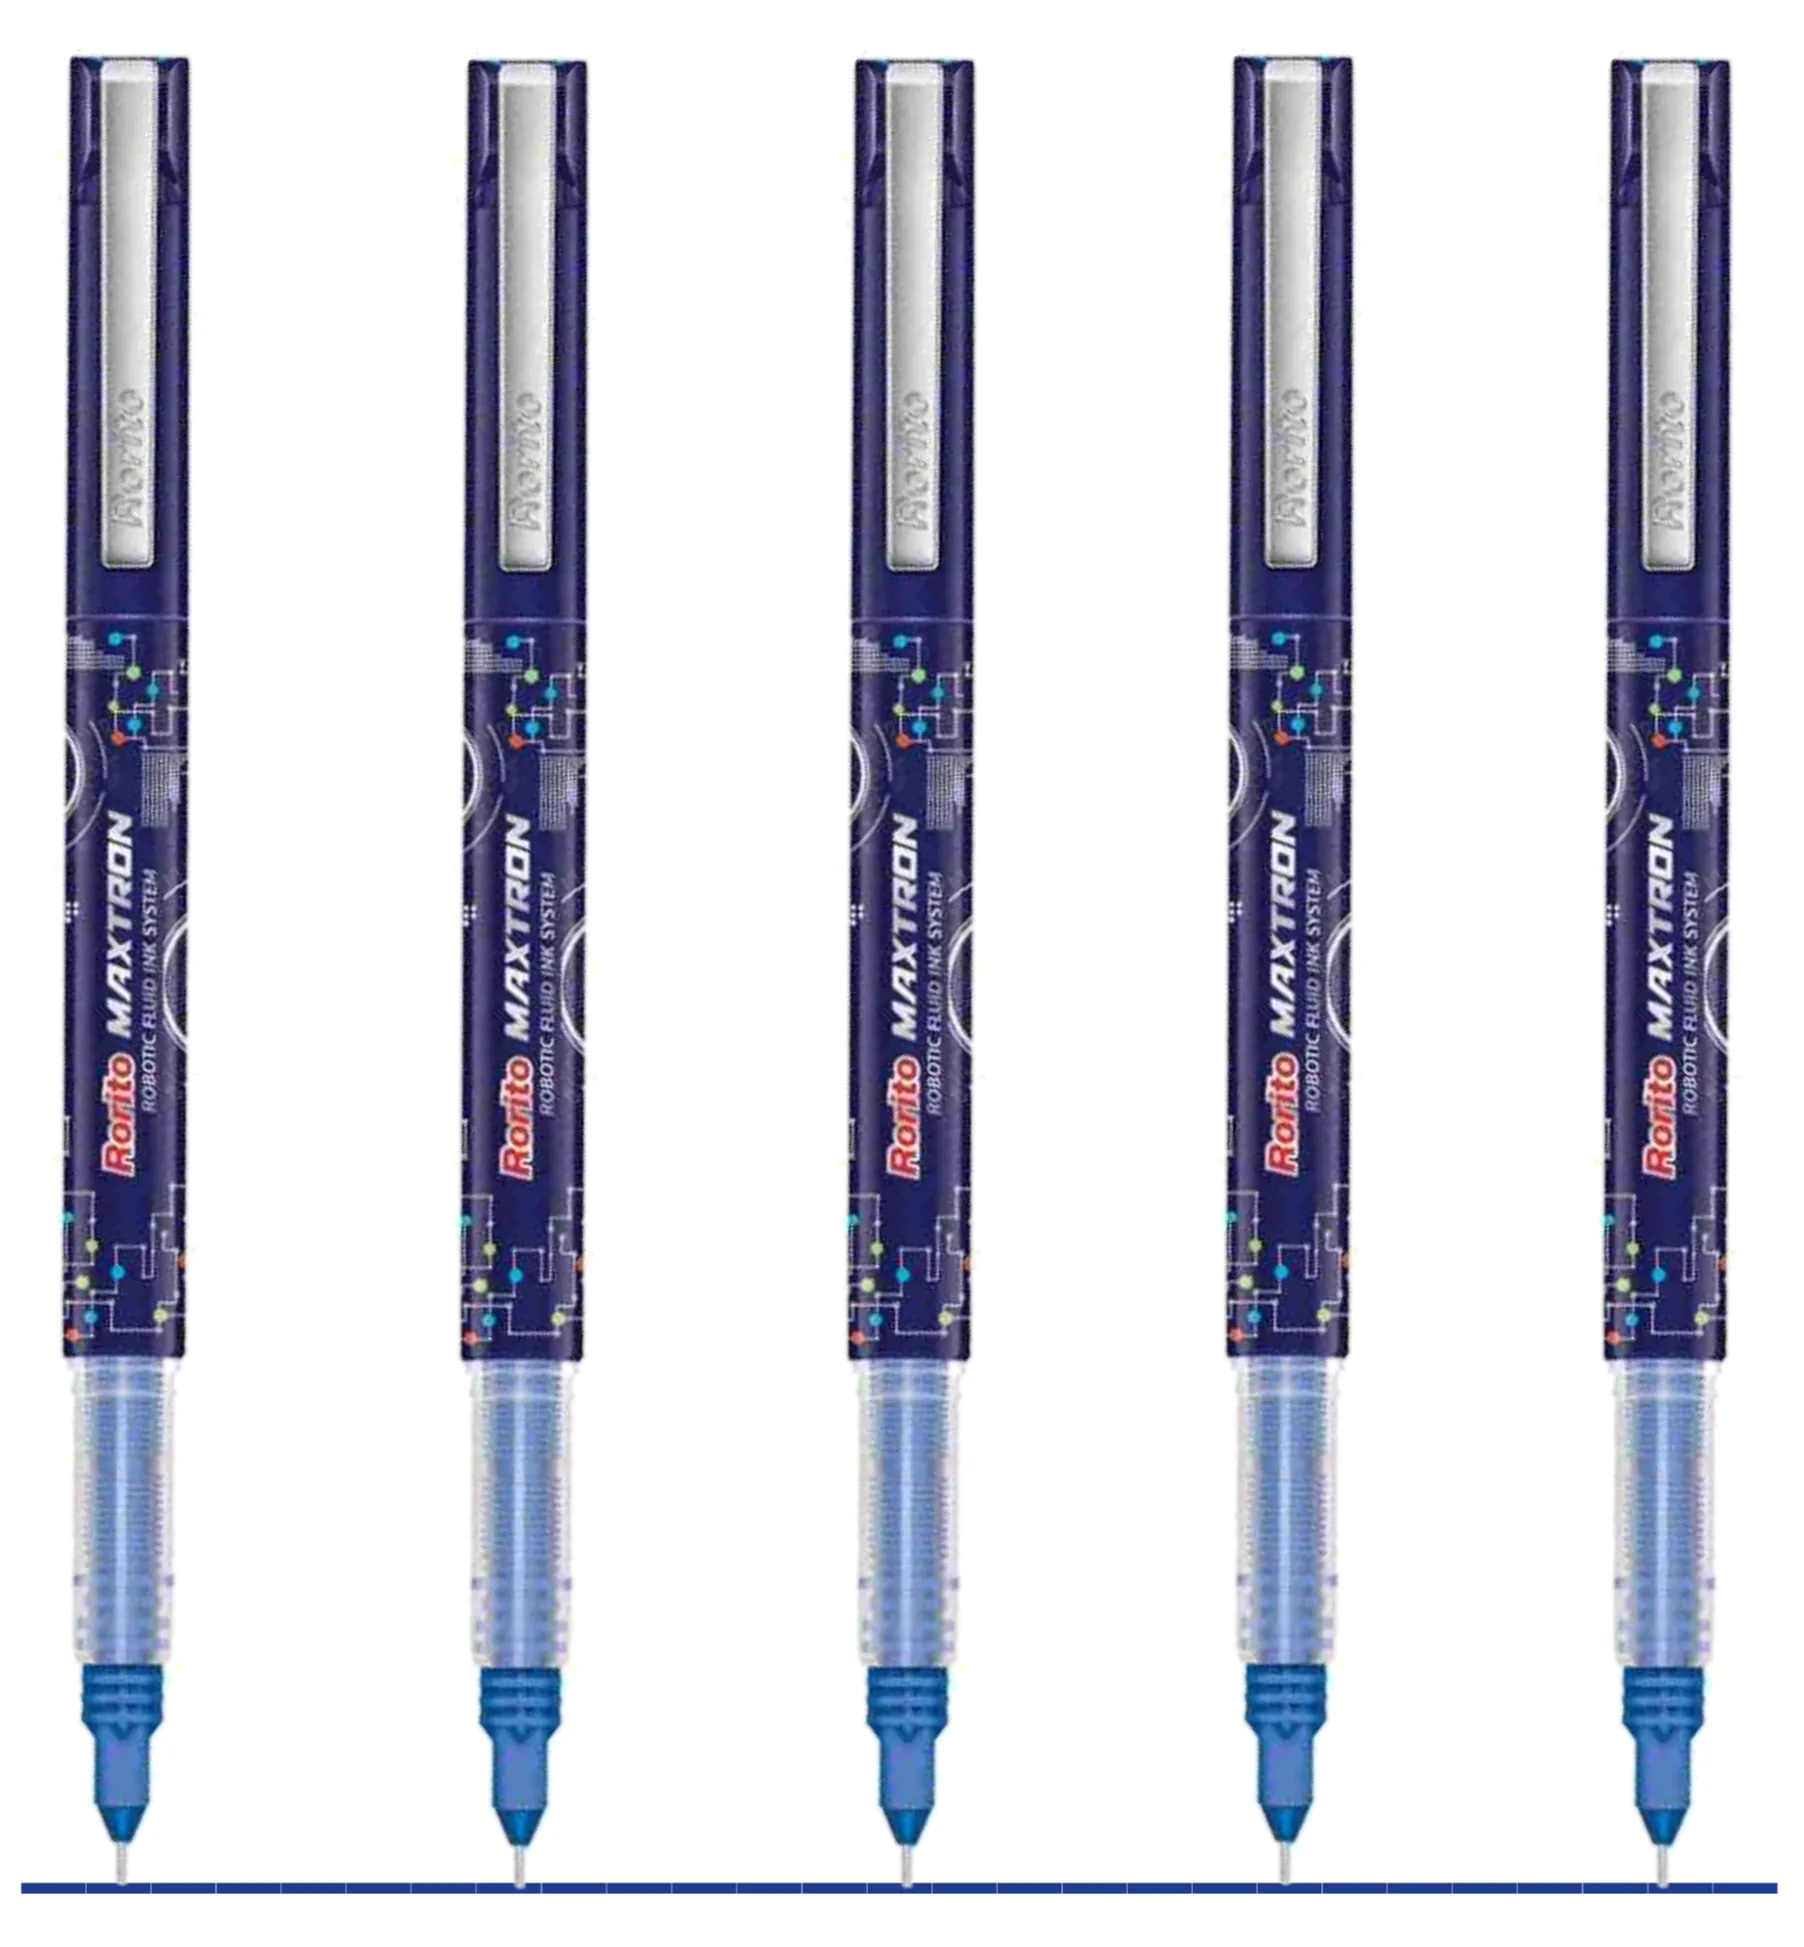 Rorito Maxtron Gel pen Blue Ink (Pack of 5)